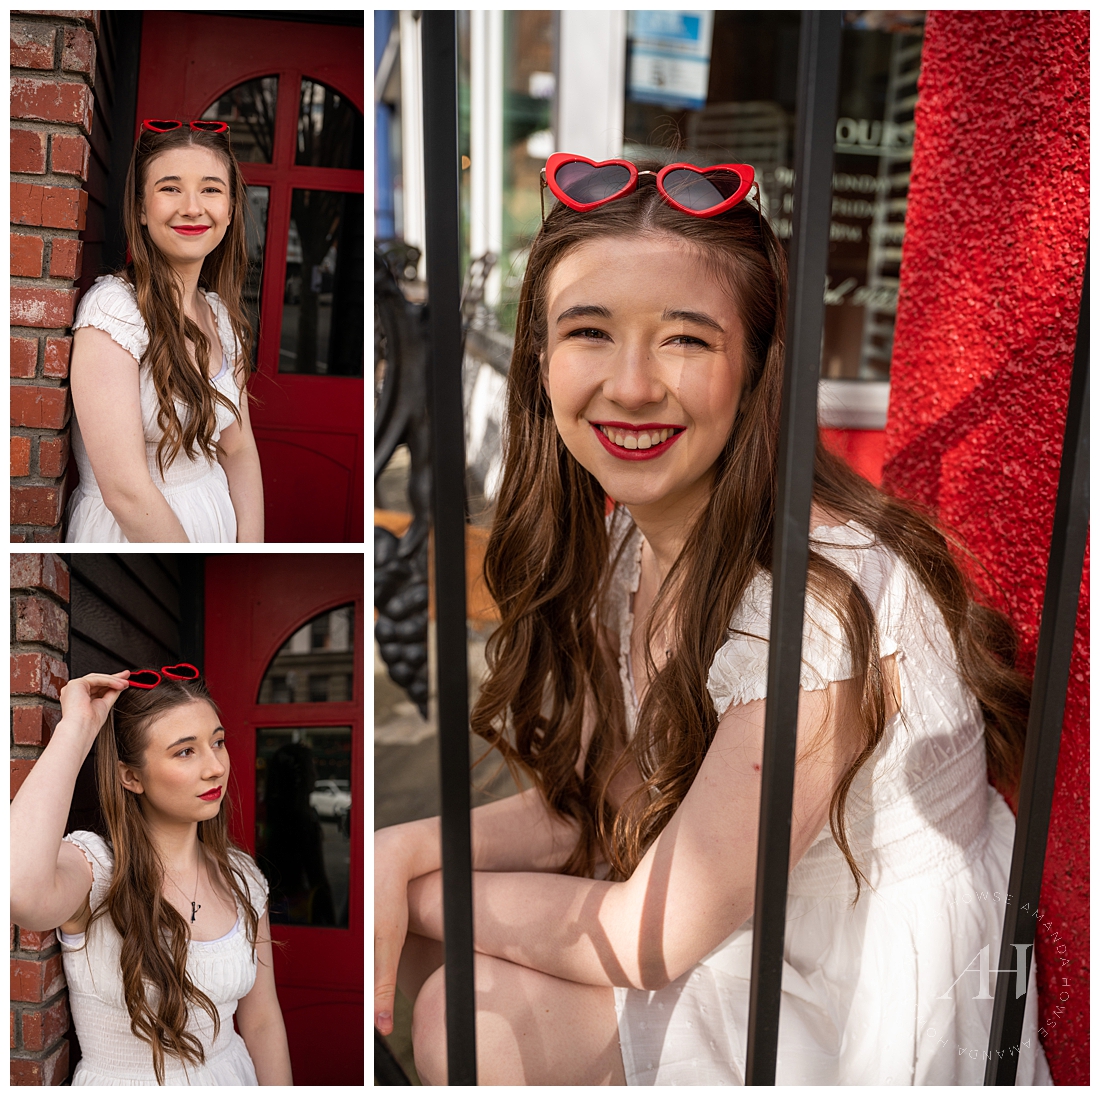 Urban Downtown Tacoma Senior Portraits | Retro Red Sunglasses and White Dress | Photographed by the best Tacoma, Washington Senior Photographer Amanda Howse